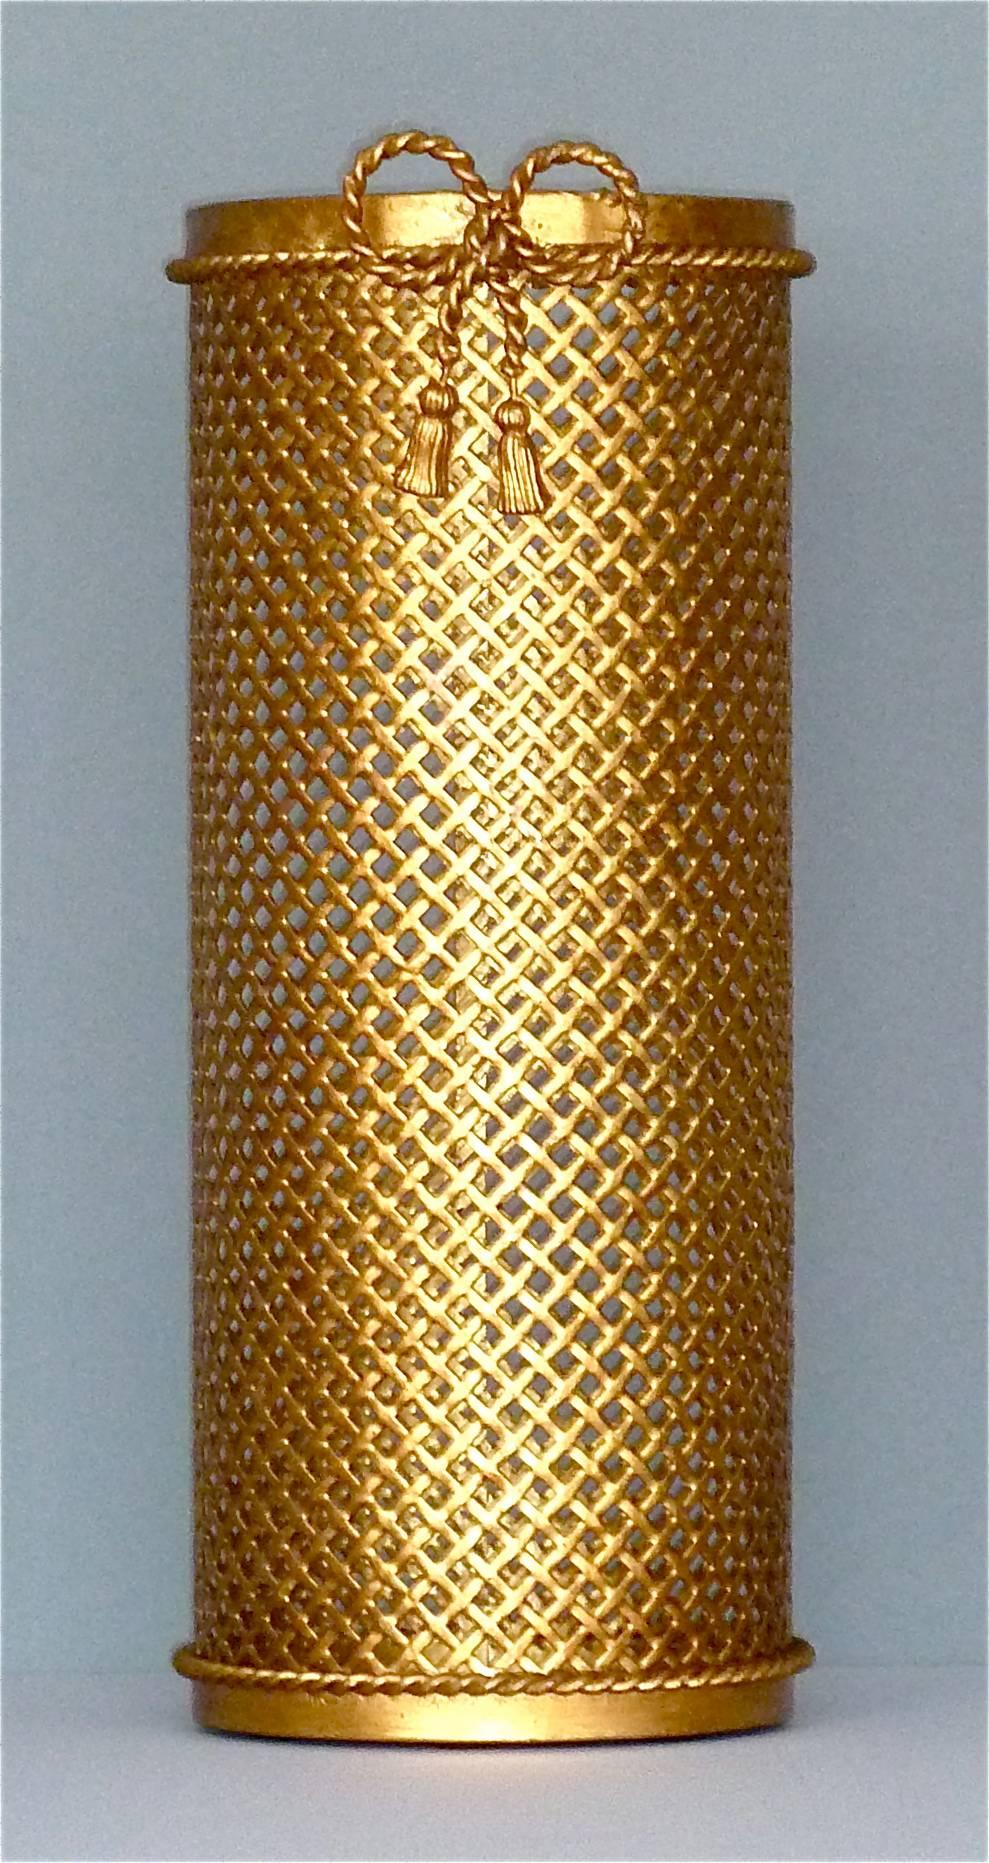 Two Midcentury Italian Gilt Woven Metal Umbrella Stands, 1950s, Hans Kögl Style 2